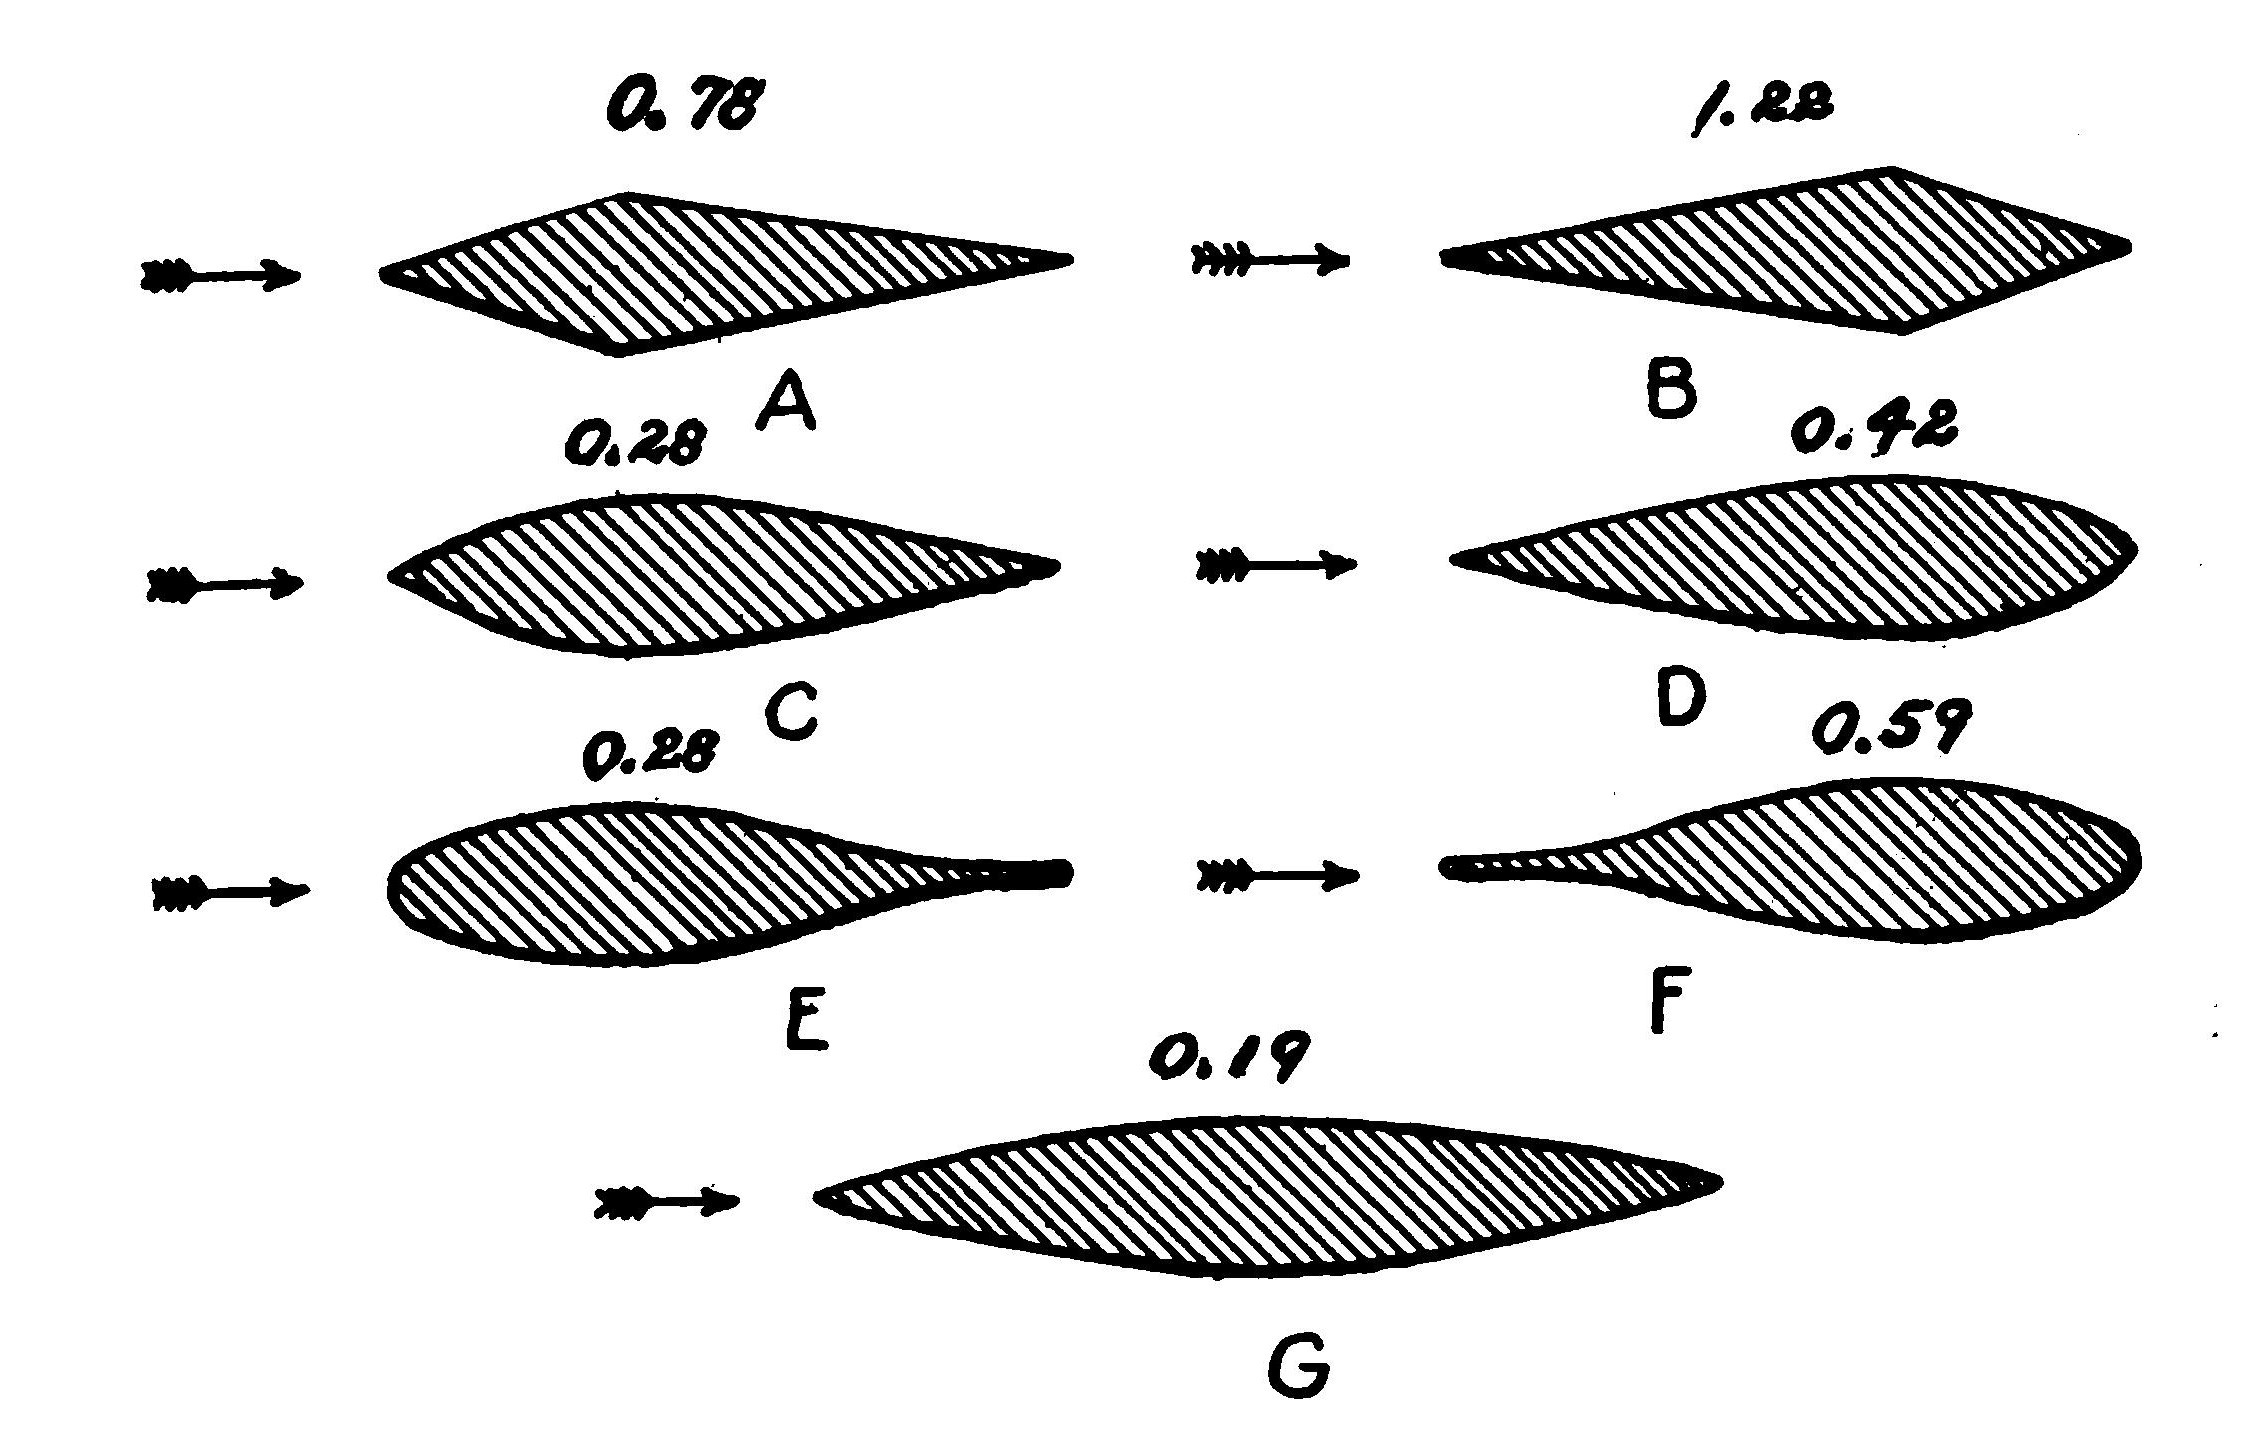 FIG. 10. The figures given above each shape show the "drift" in lbs. of wooden bars of those shapes when placed in a wind blowing 40 miles an hour.